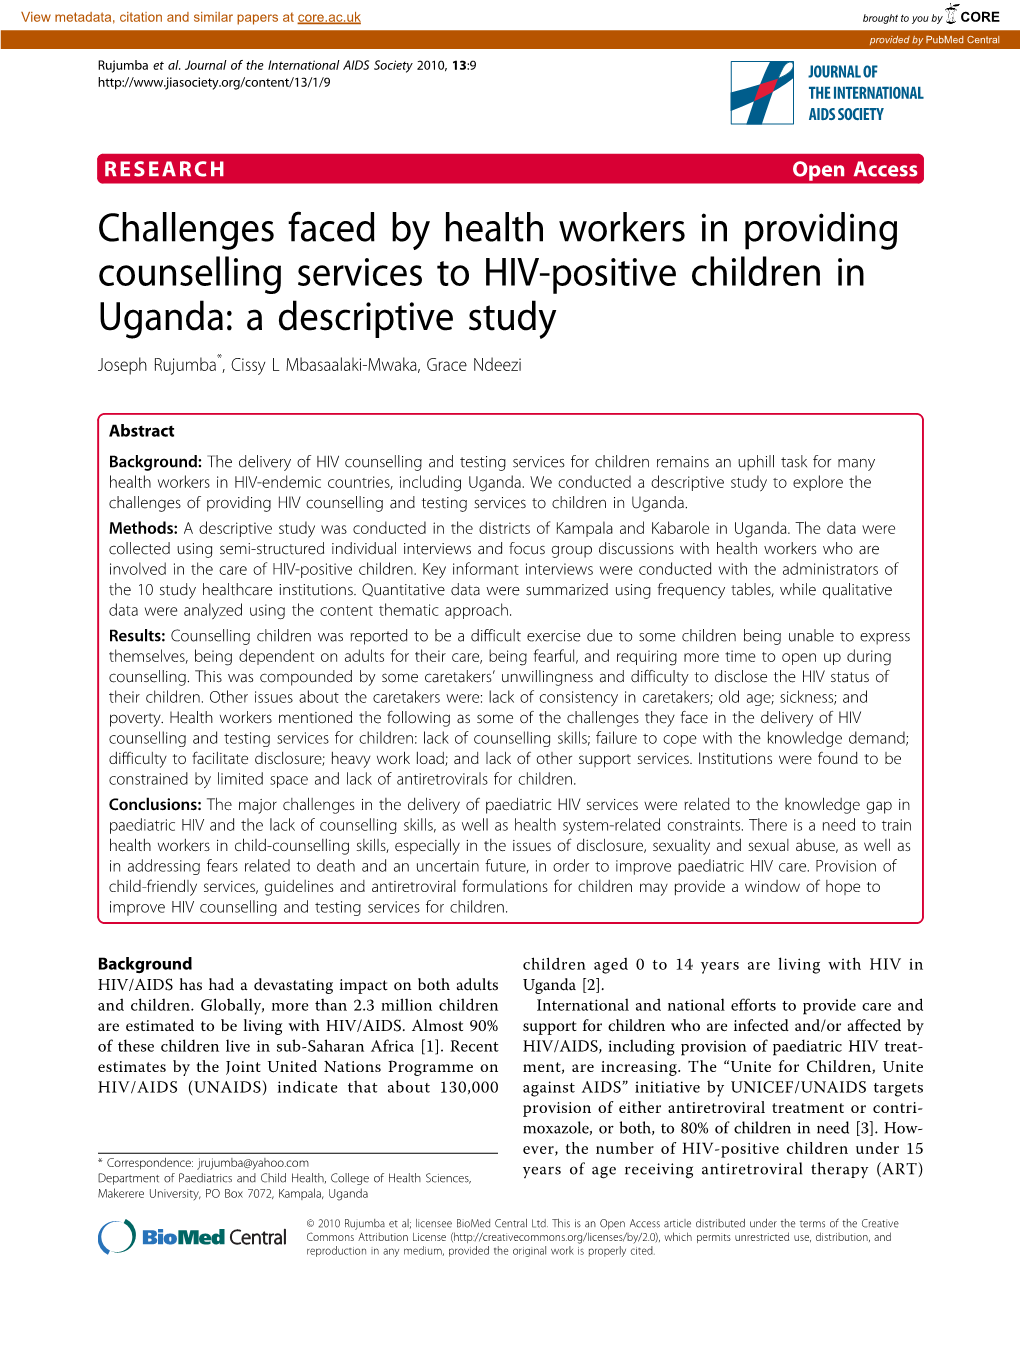 Challenges Faced by Health Workers in Providing Counselling Services To